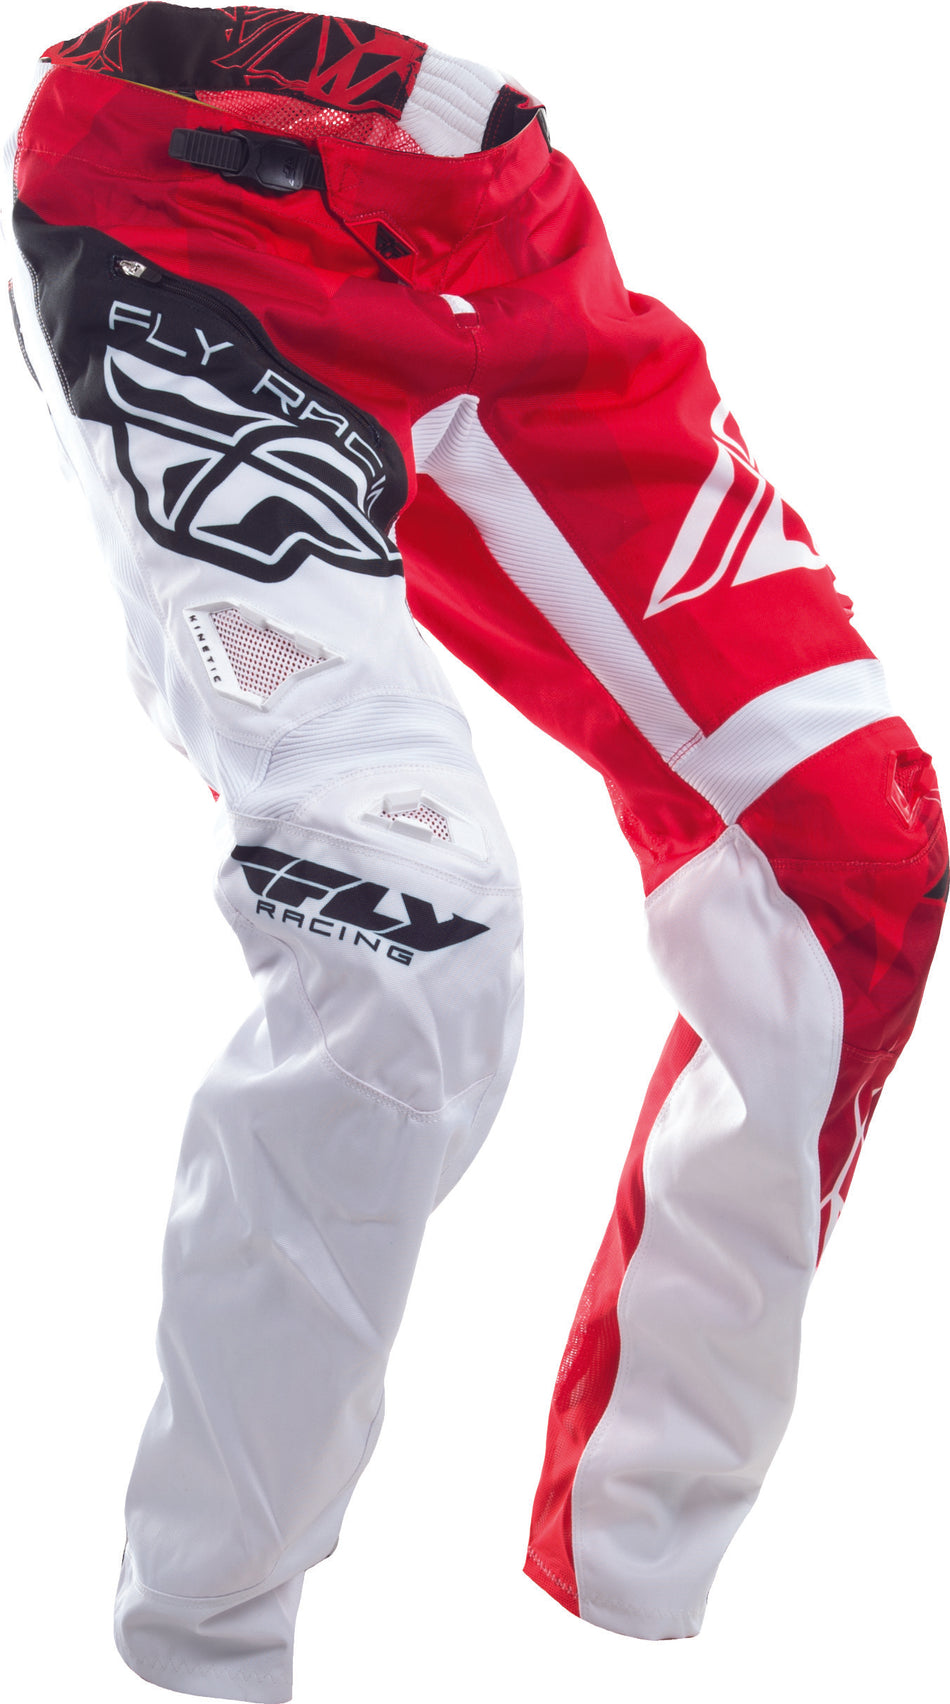 FLY RACING Bicycle Crux Pant Red/White Sz 18 370-02218